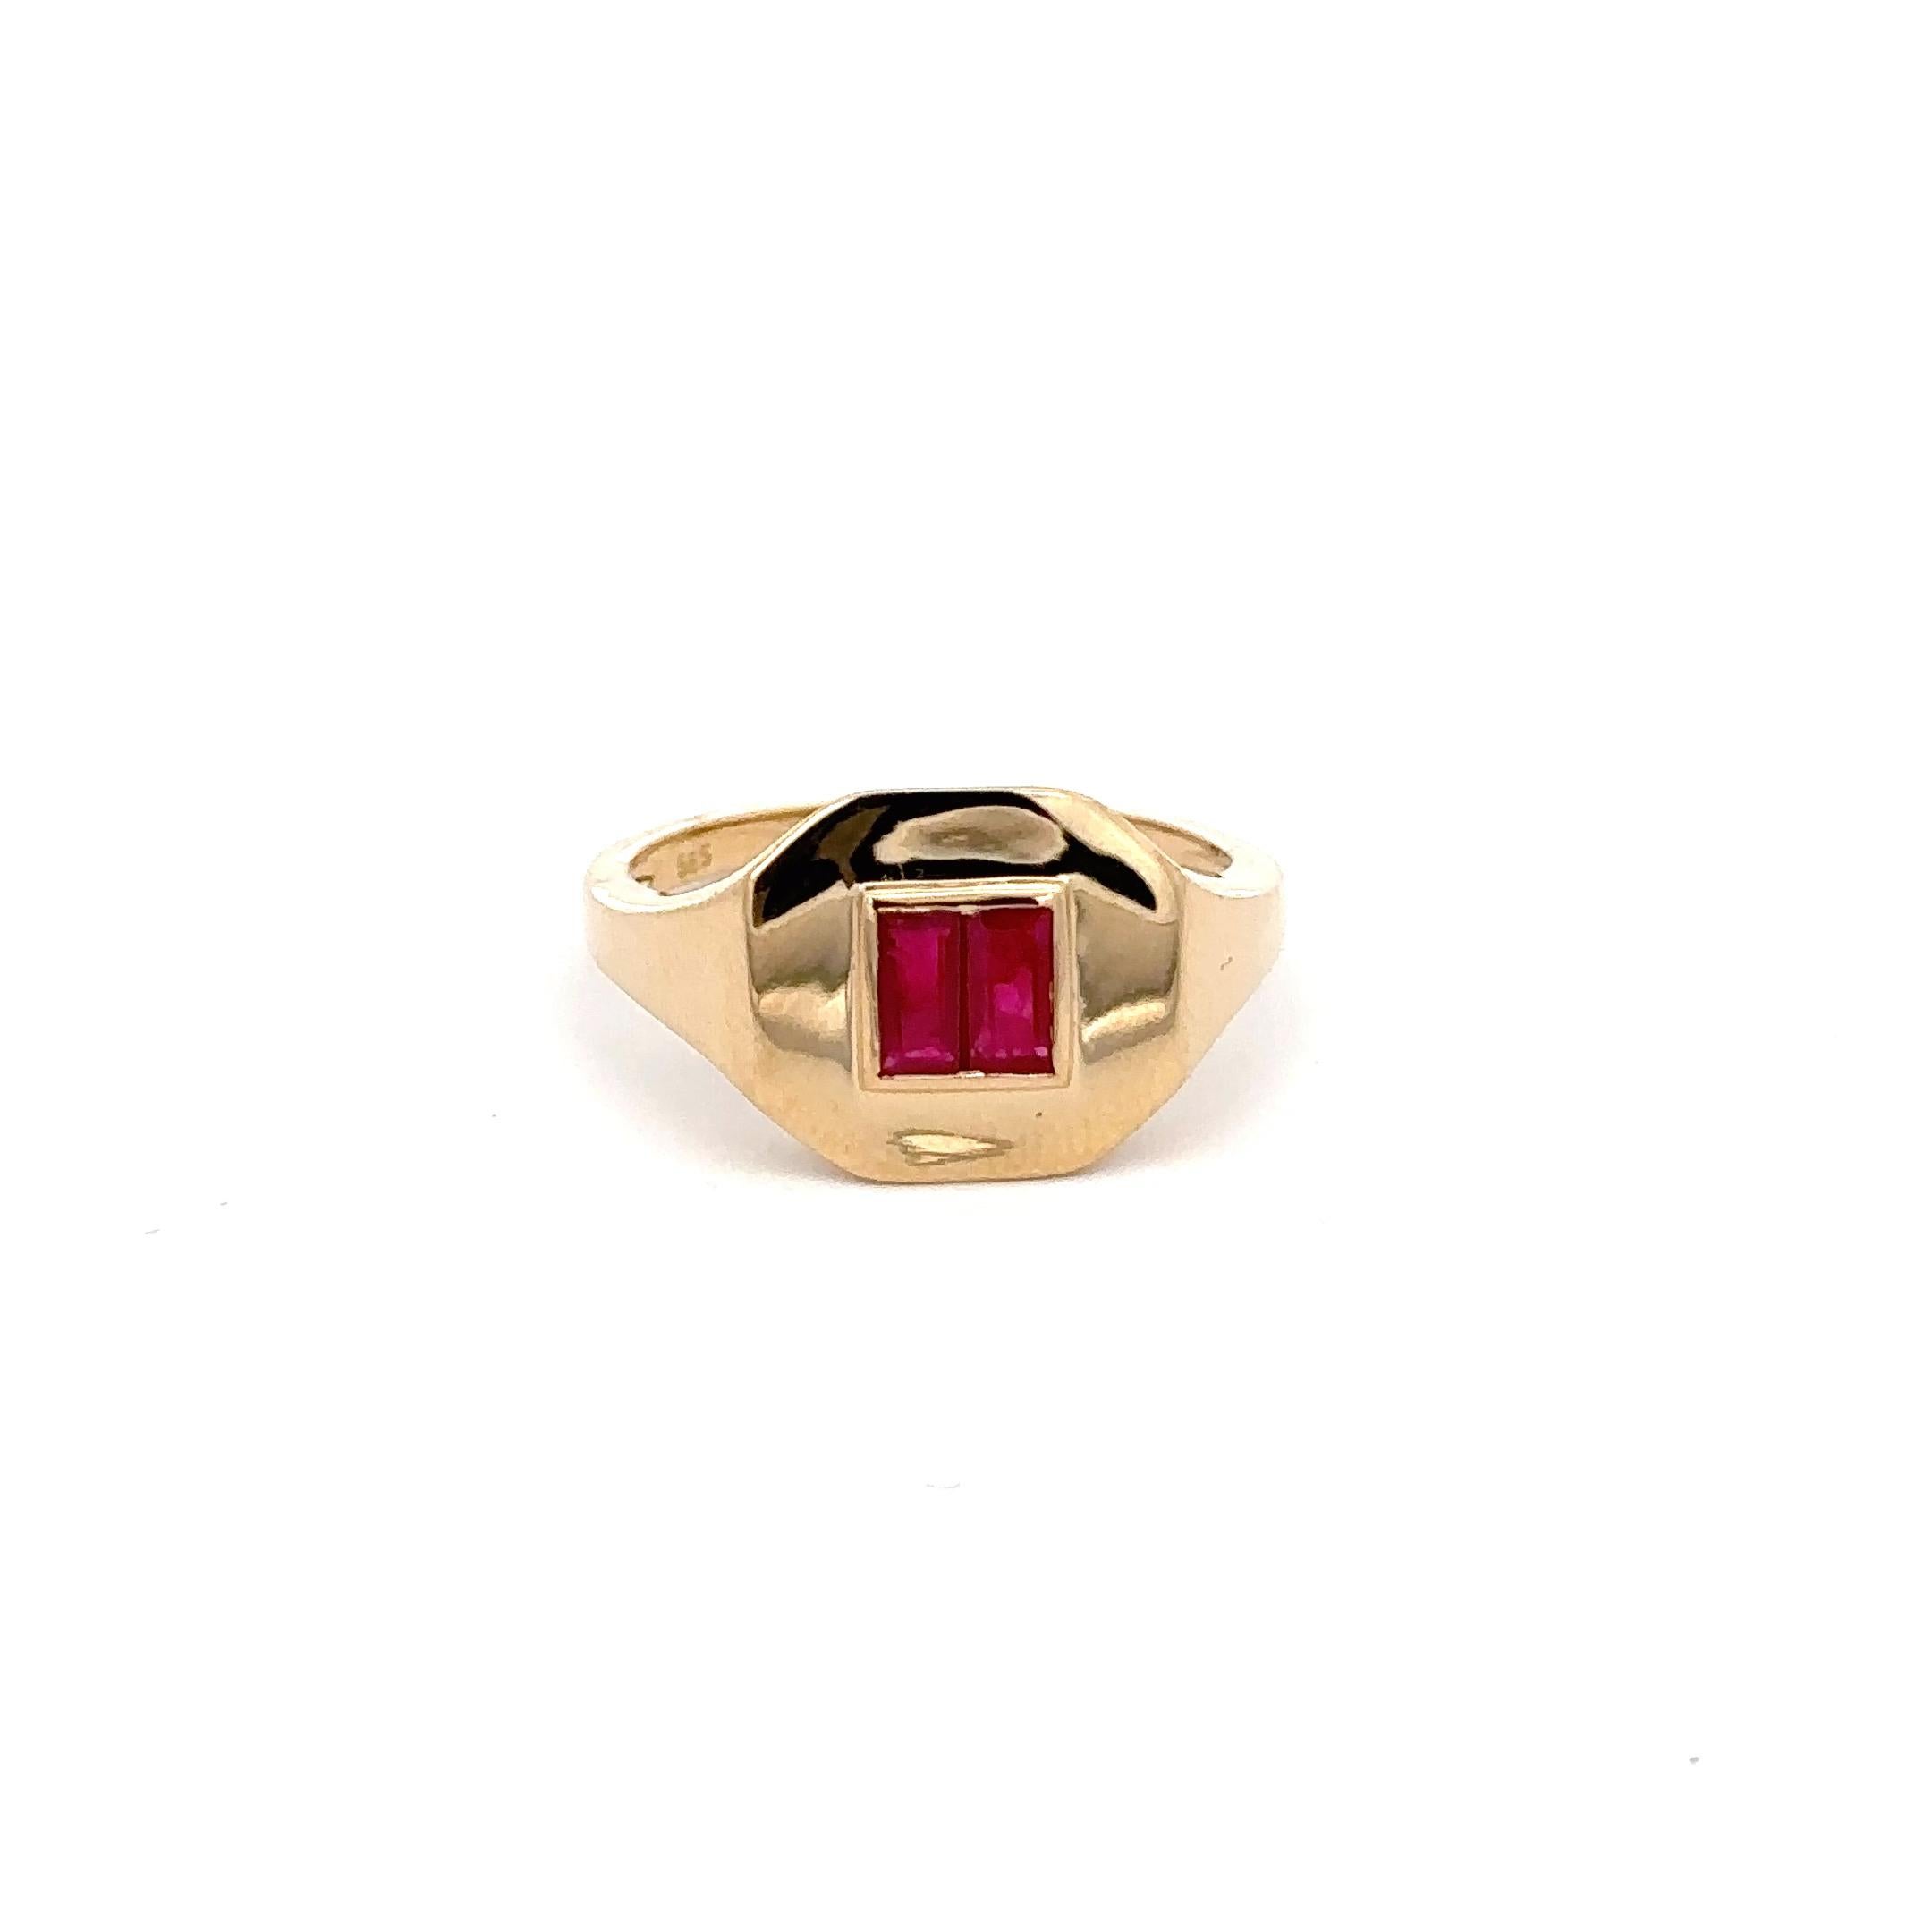 For Sale:  Baguette Cut Ruby Signet Ring 14kt Solid Yellow Gold Ruby Gemstone Pinky Ring 8